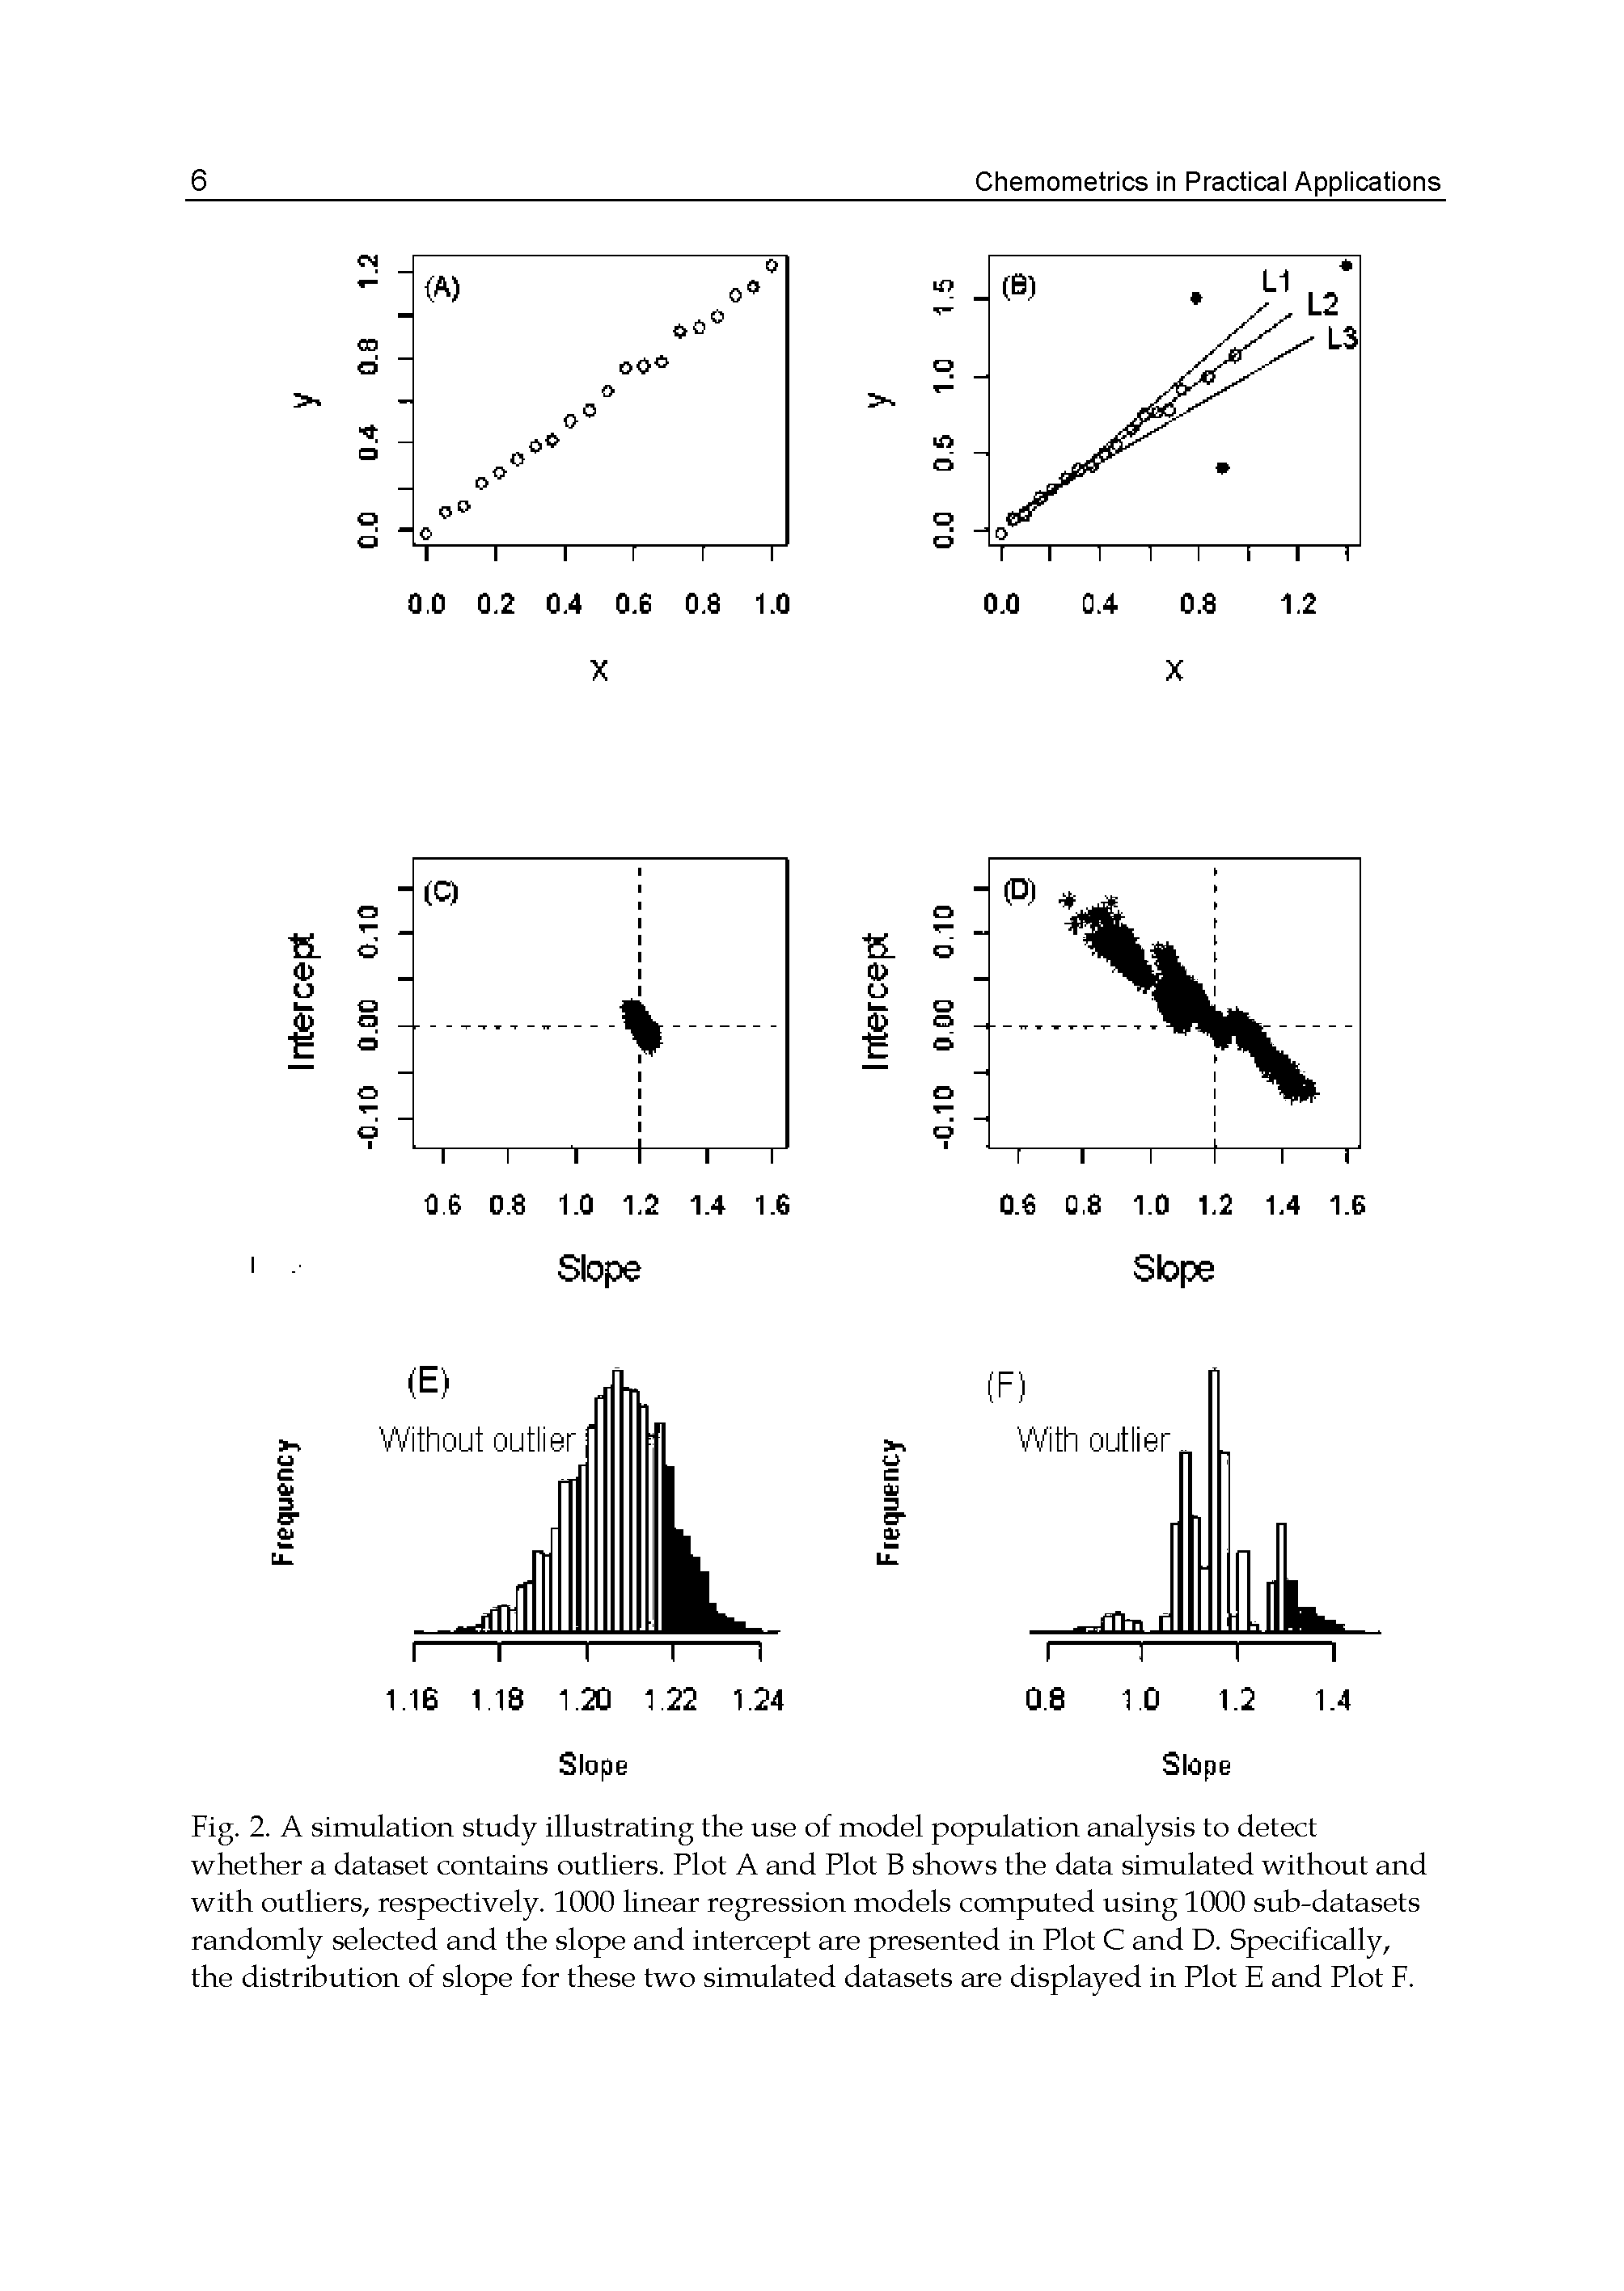 Fig. 2. A simulation study illustrating the use of model population analysis to detect whether a dataset contains outliers. Plot A and Plot B shows the data simulated without and with outliers, respectively. 1000 linear regression models computed using 1000 sub-datasets randomly selected and the slope and intercept are presented in Plot C and D. Specifically, the distribution of slope for these two simulated datasets are displayed in Plot E and Plot F.